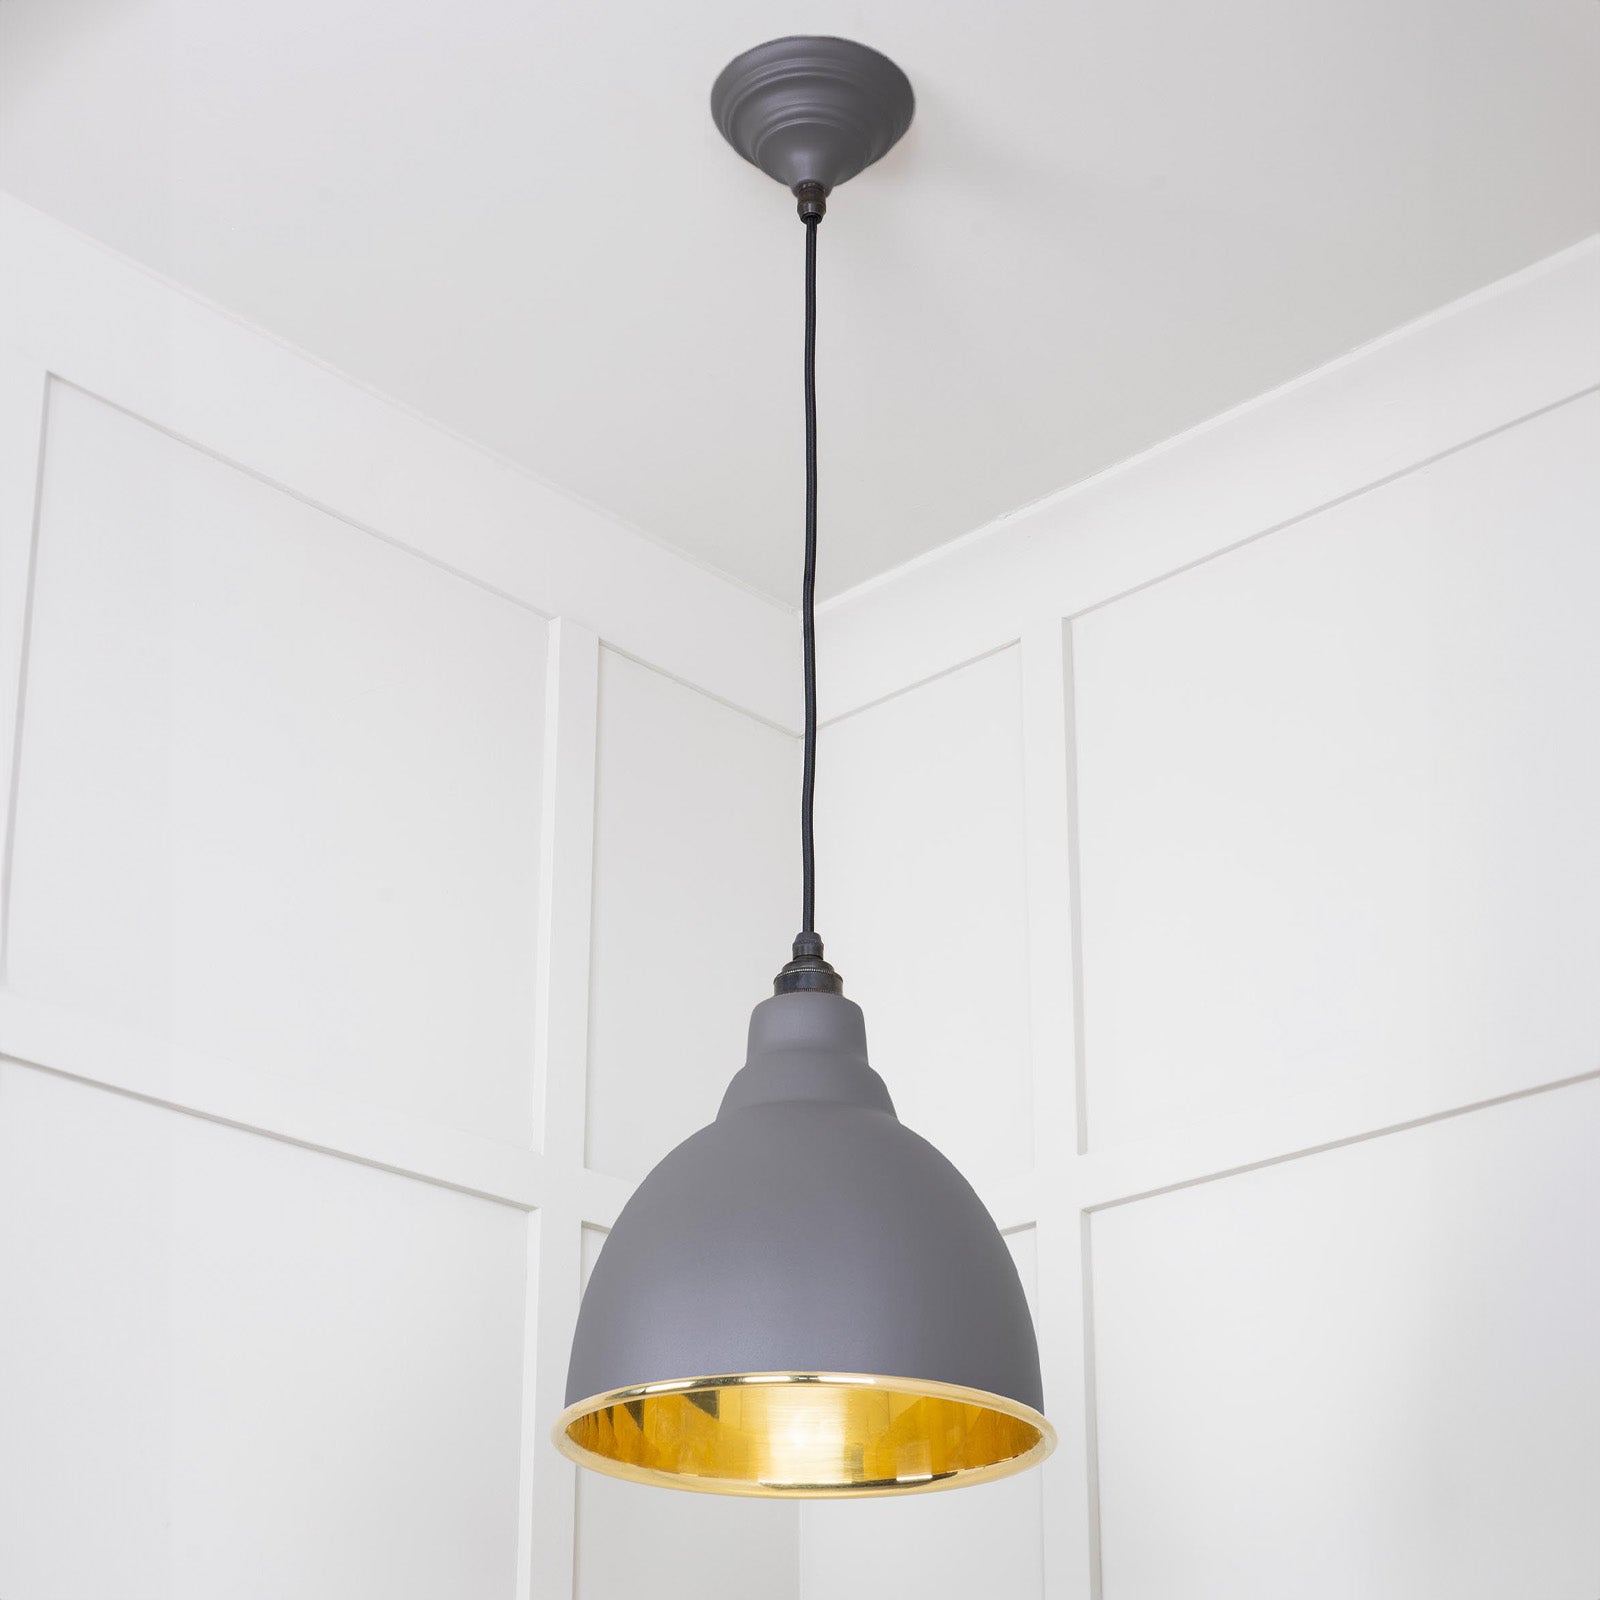 SHOW Full Image of Hanging Brindley Ceiling Light in Bluff